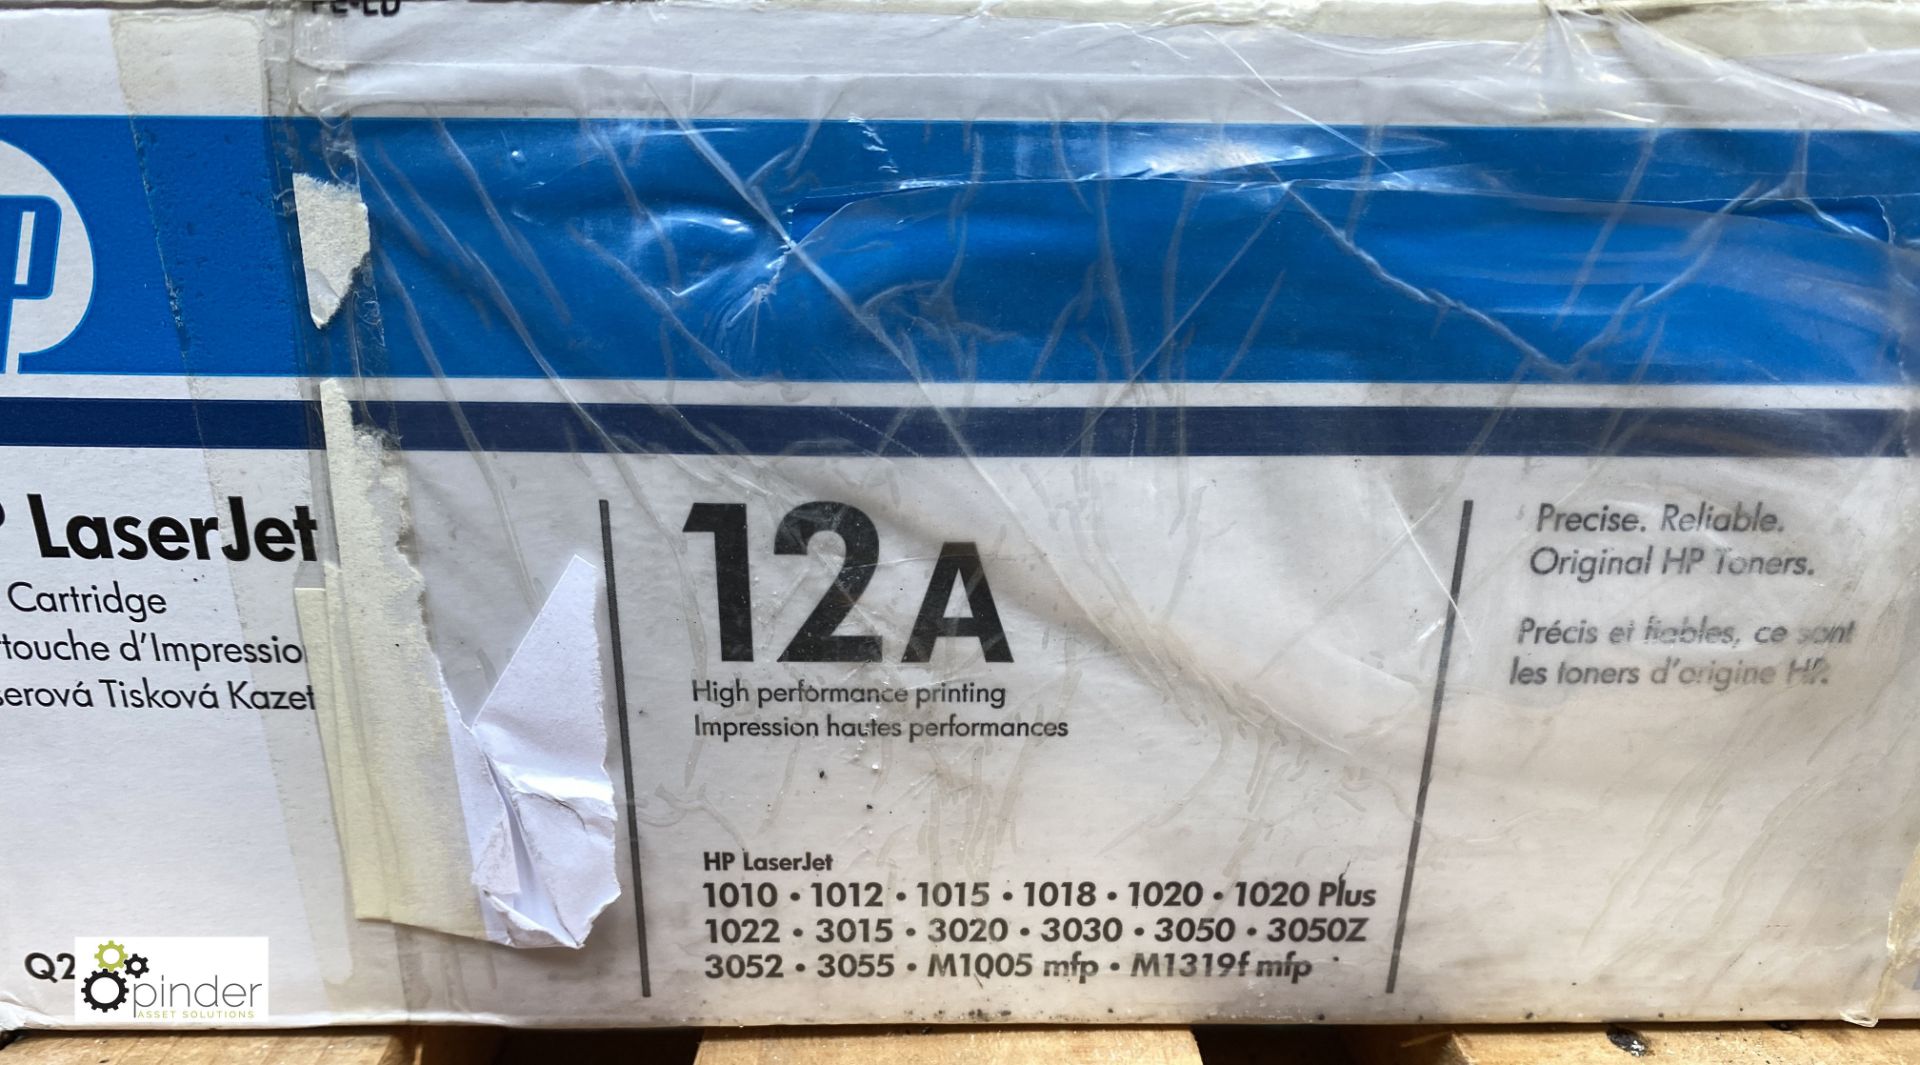 3 HP 12A Print Cartridges, boxed and unused - Image 2 of 2